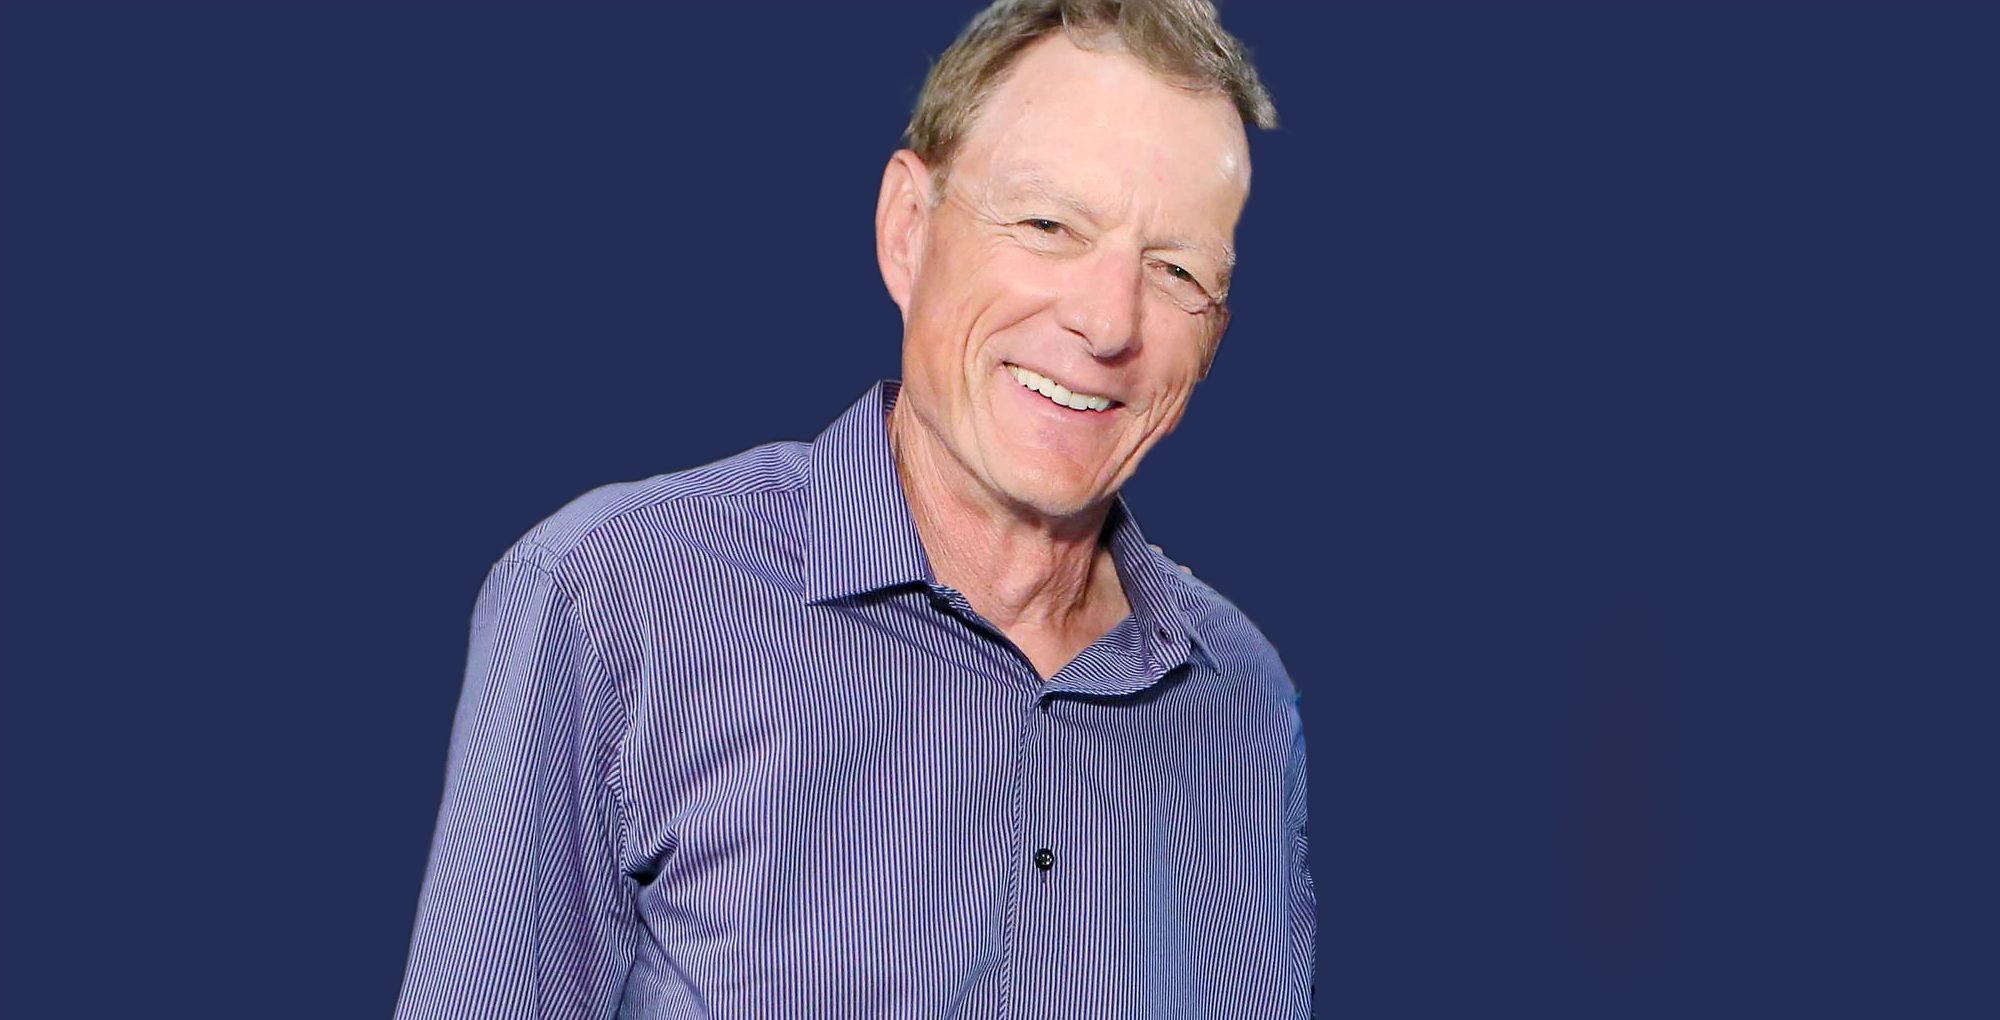 wayne northrop, an alum of days of our lives, is celebrating his birthday.